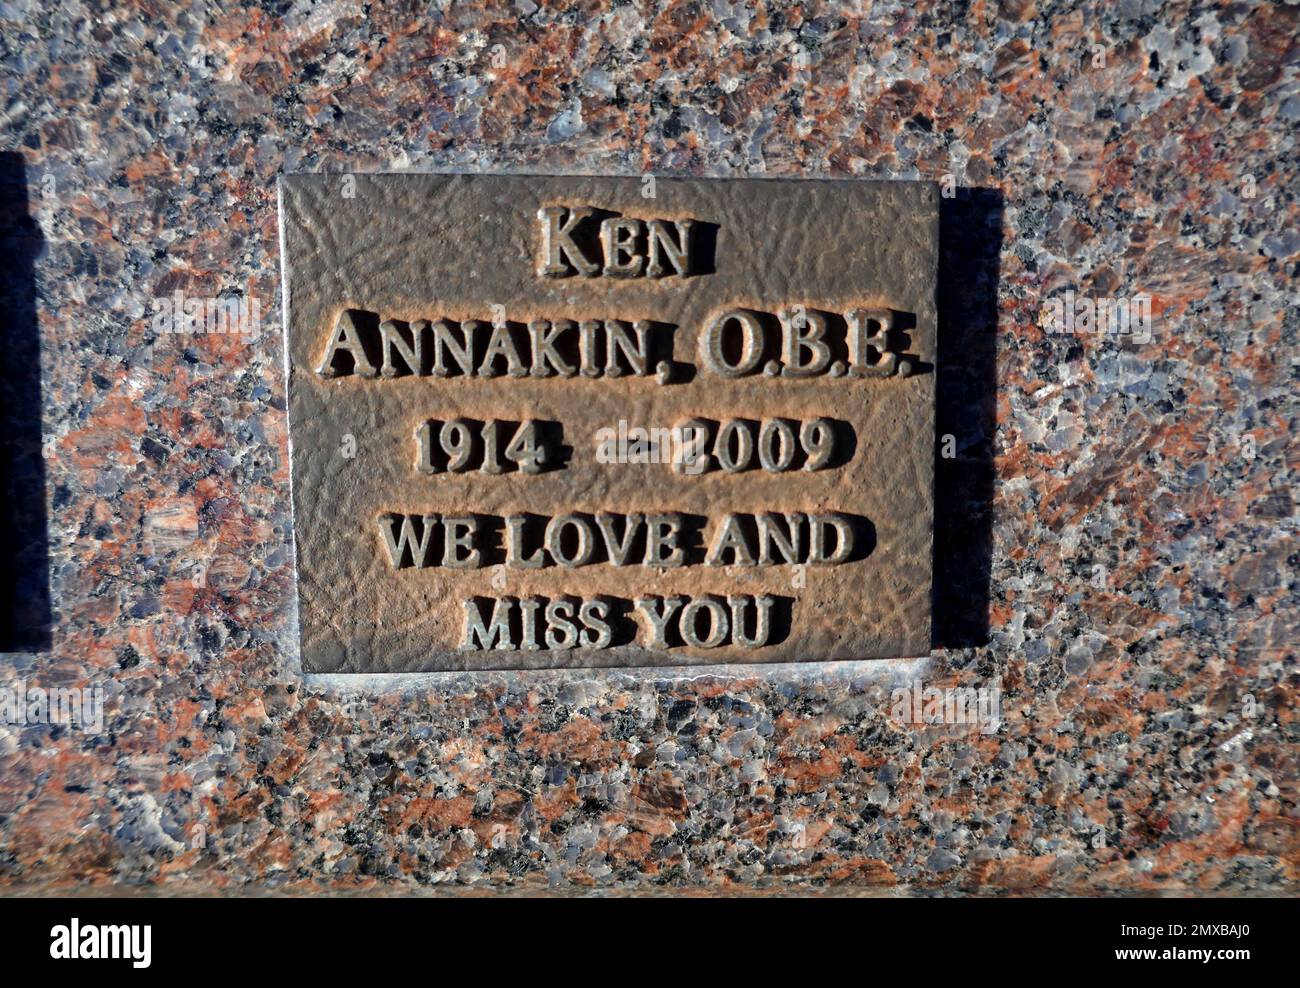 Los Angeles, California, USA 31st January 2023 A general view of atmosphere of Director Ken Annakin's Grave at Pierce Brothers Westwood Village Memorial Park Cemetery on January 31, 2023 in Los Angeles, California, USA. Photo by Barry King/Alamy Stock Photo Stock Photo